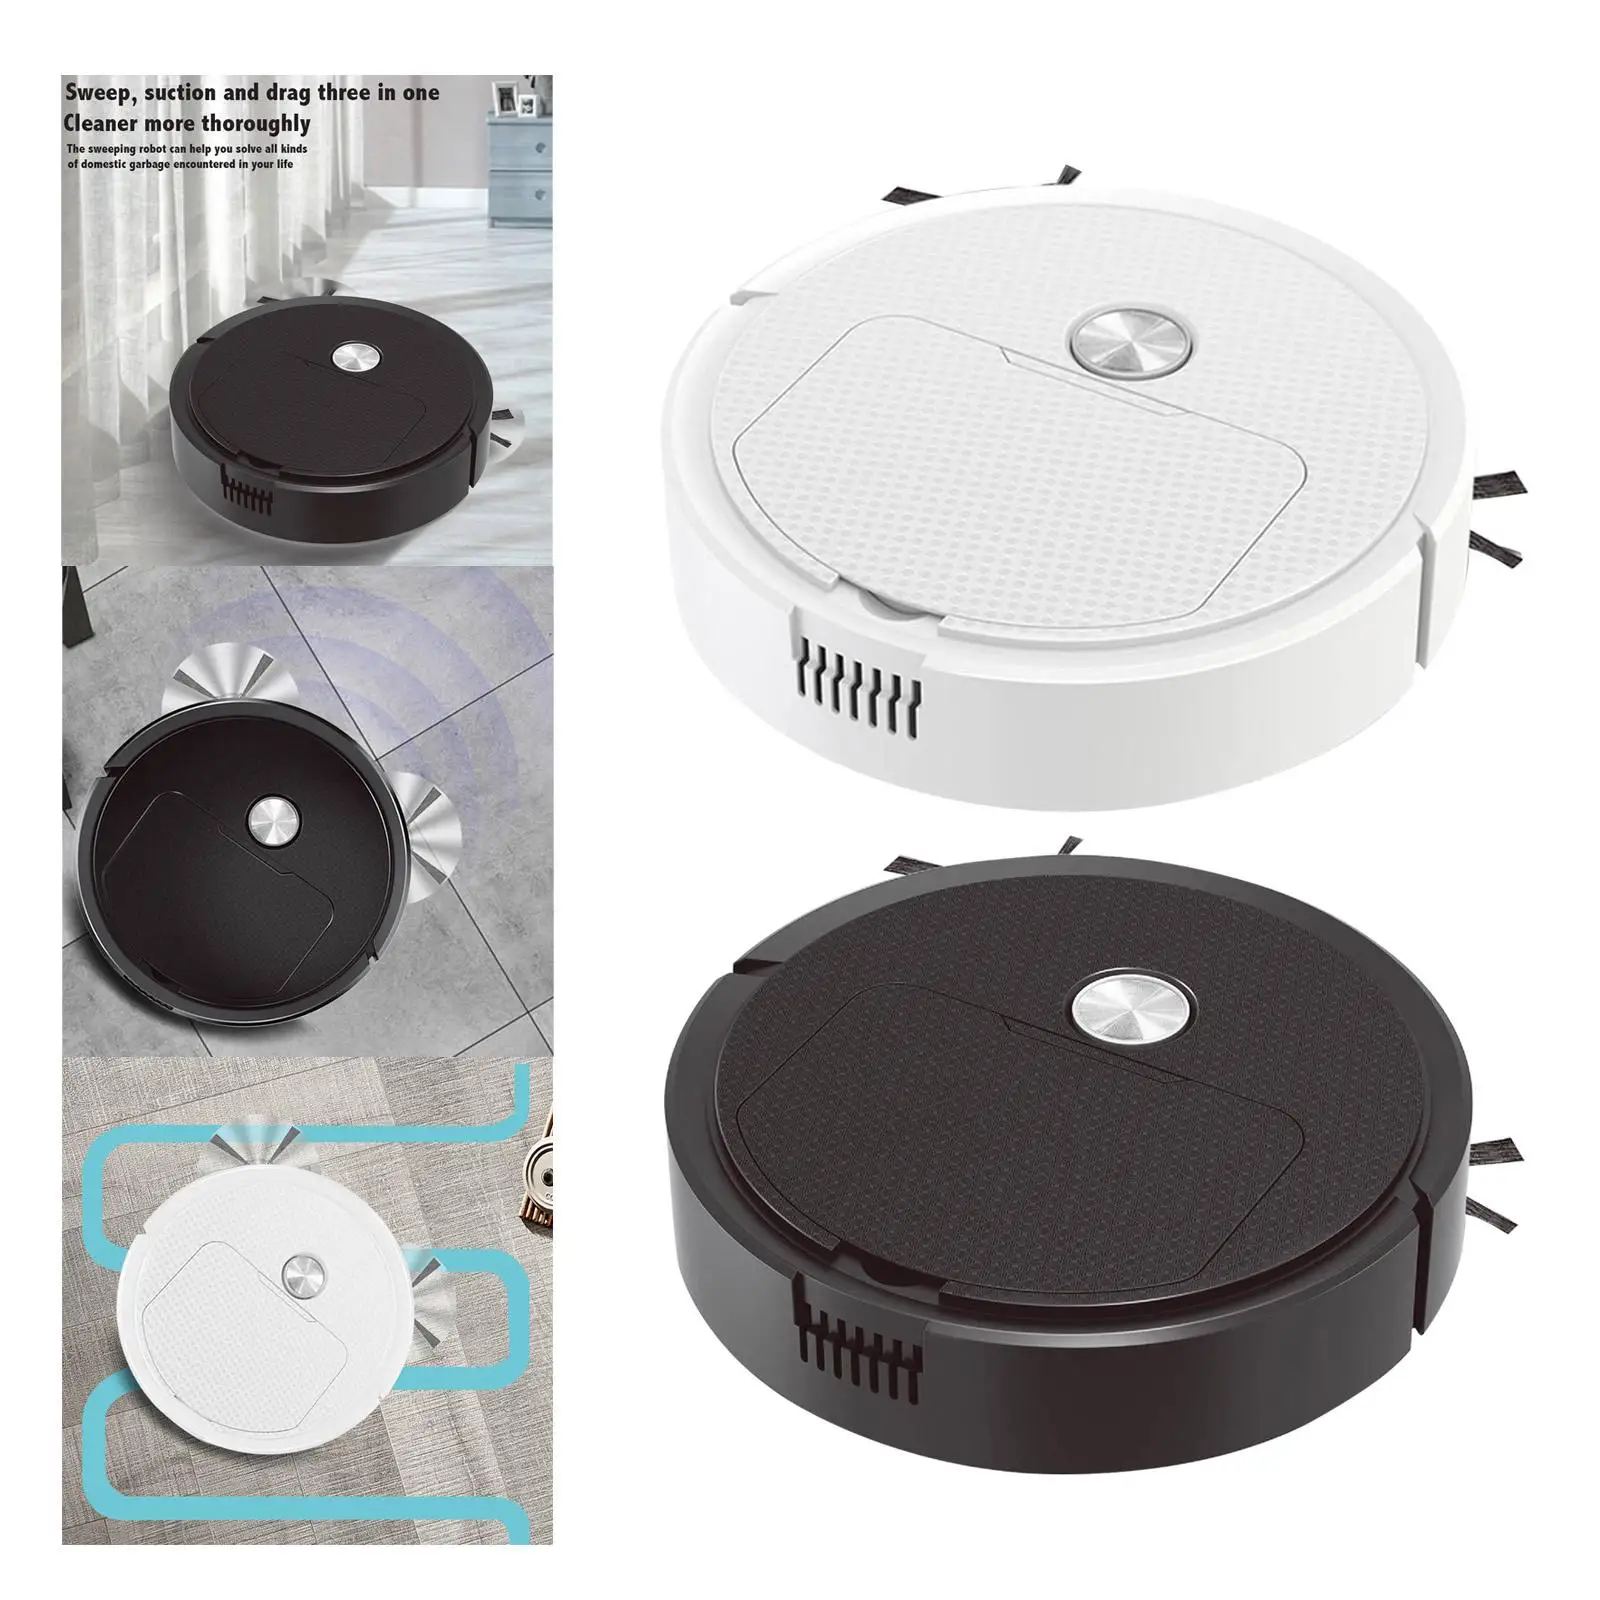  Robot Vacuum Cleaner High Efficient Suction Sweep  Noise Compact USB Charging Automatic Vacuum Cleaner  Wood Tile